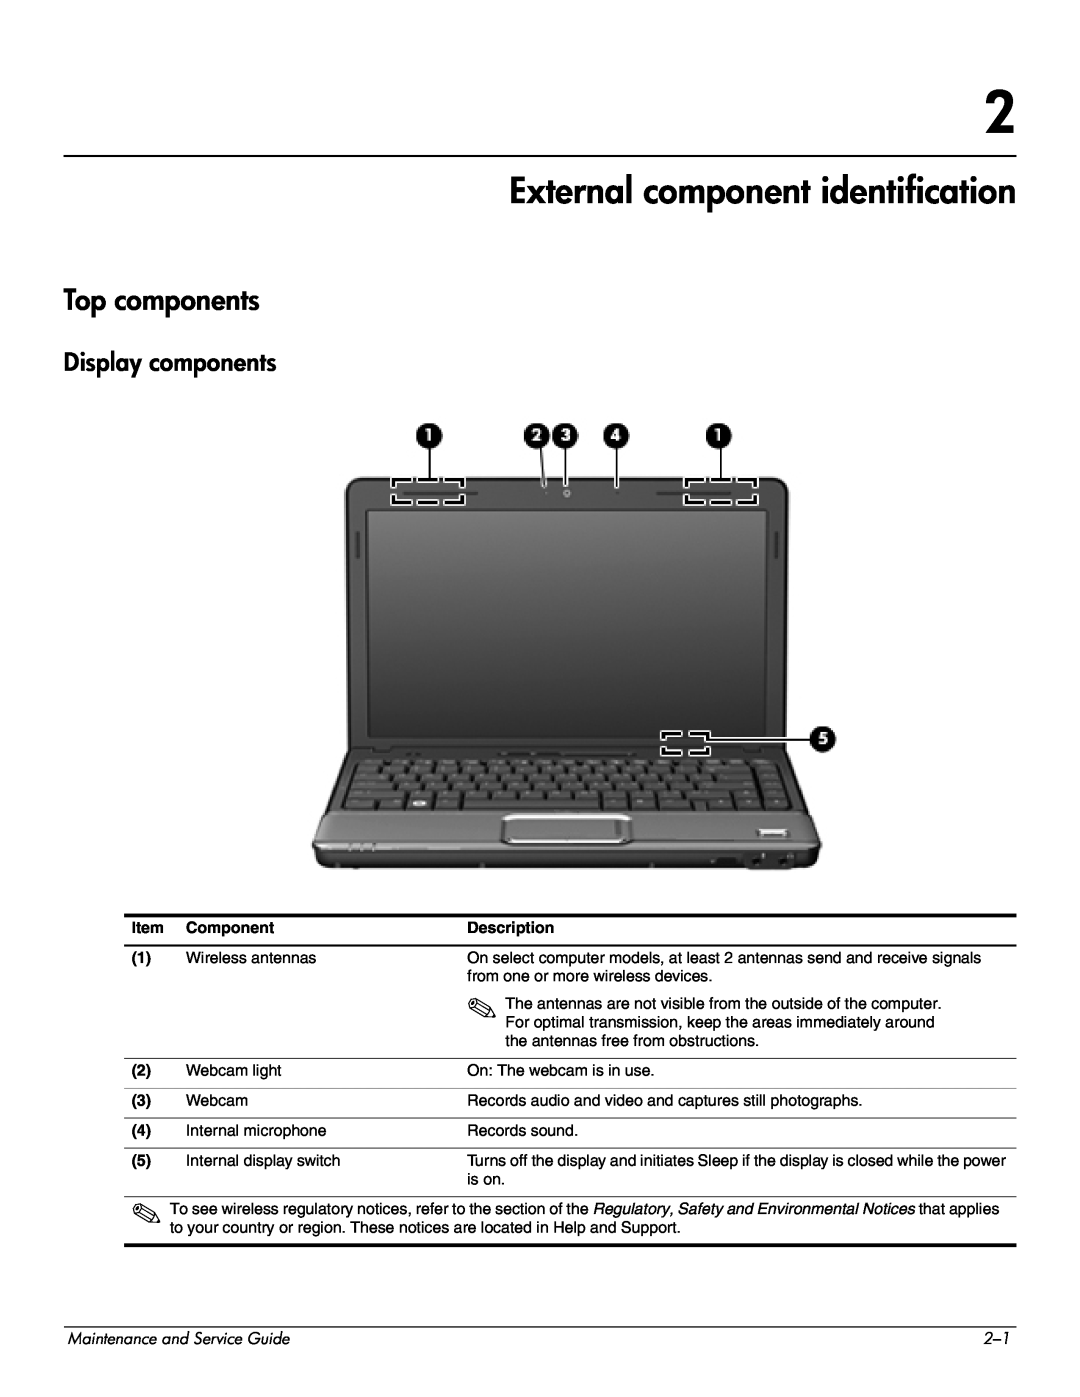 HP CQ35-121TX manual External component identification, Top components, Display components, Maintenance and Service Guide 